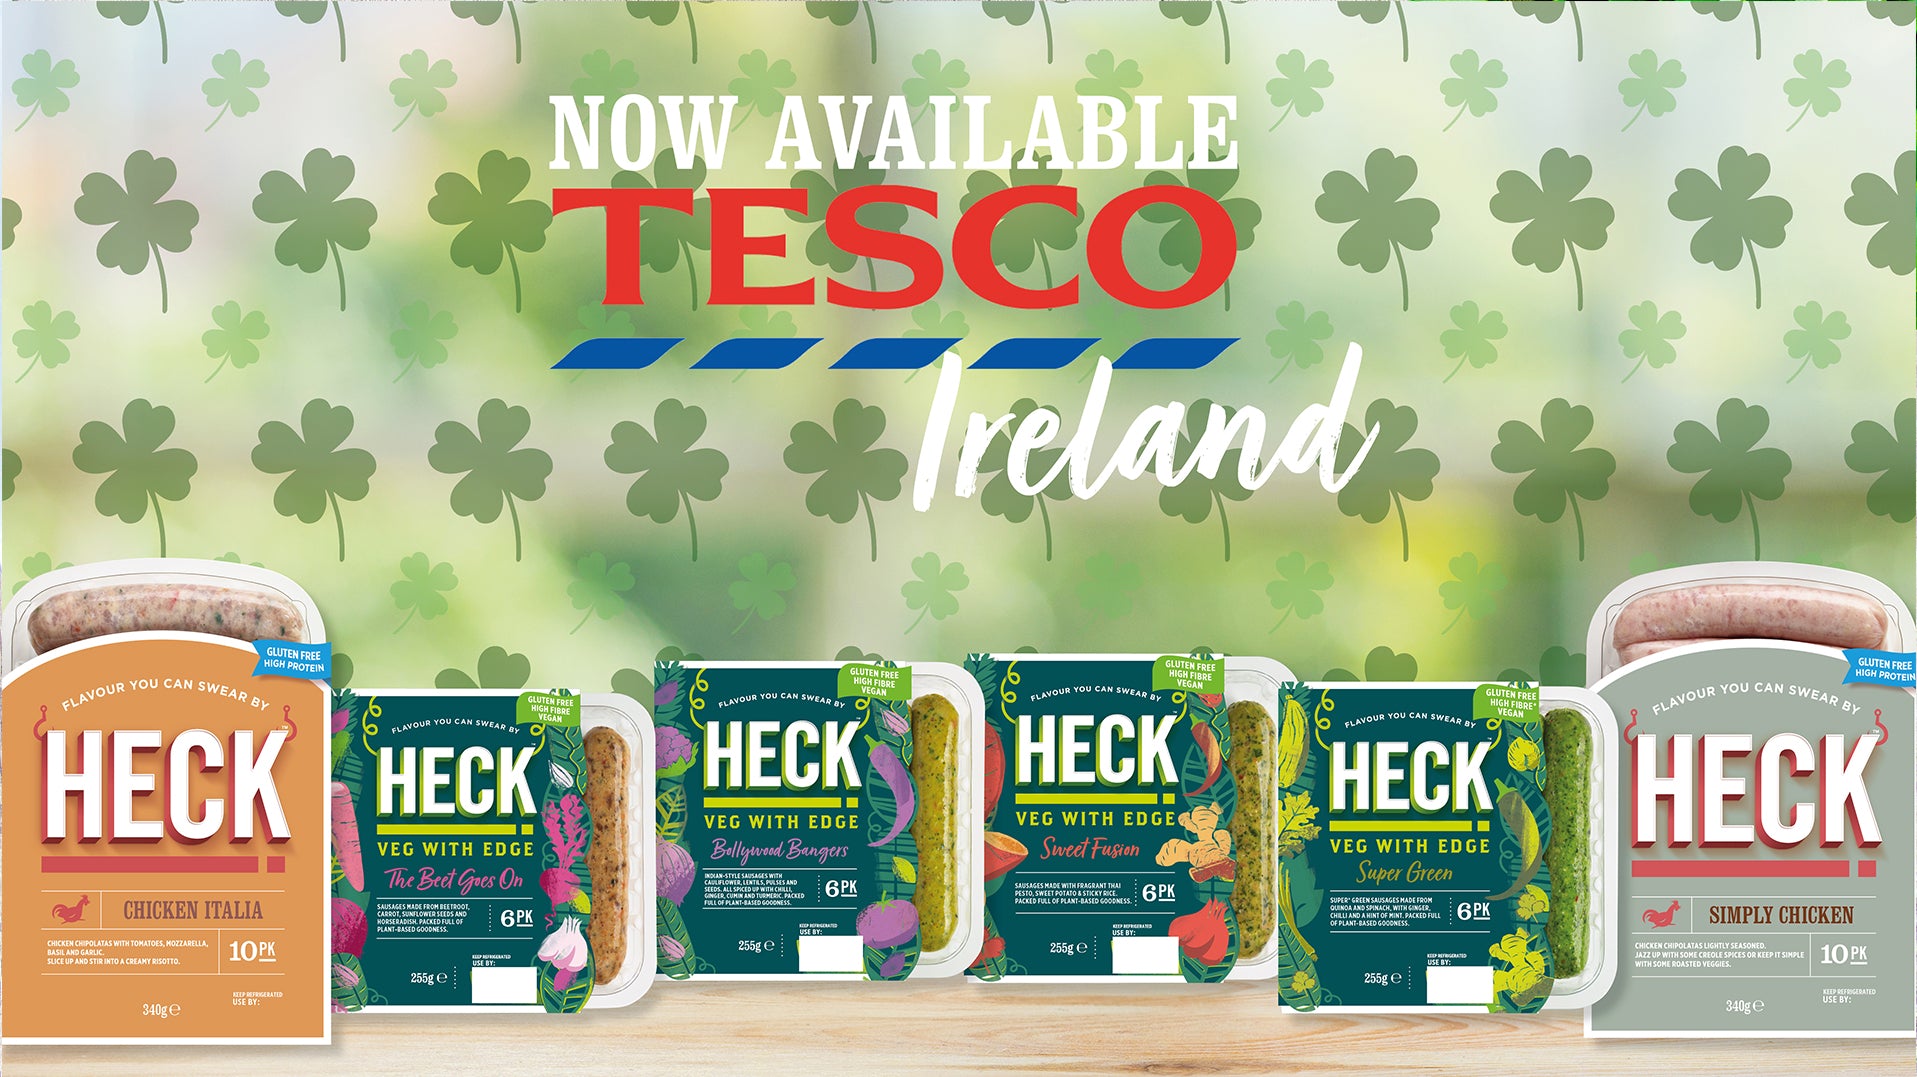 HECK & Tesco Ireland: Search the Aisles in the Emerald Isle